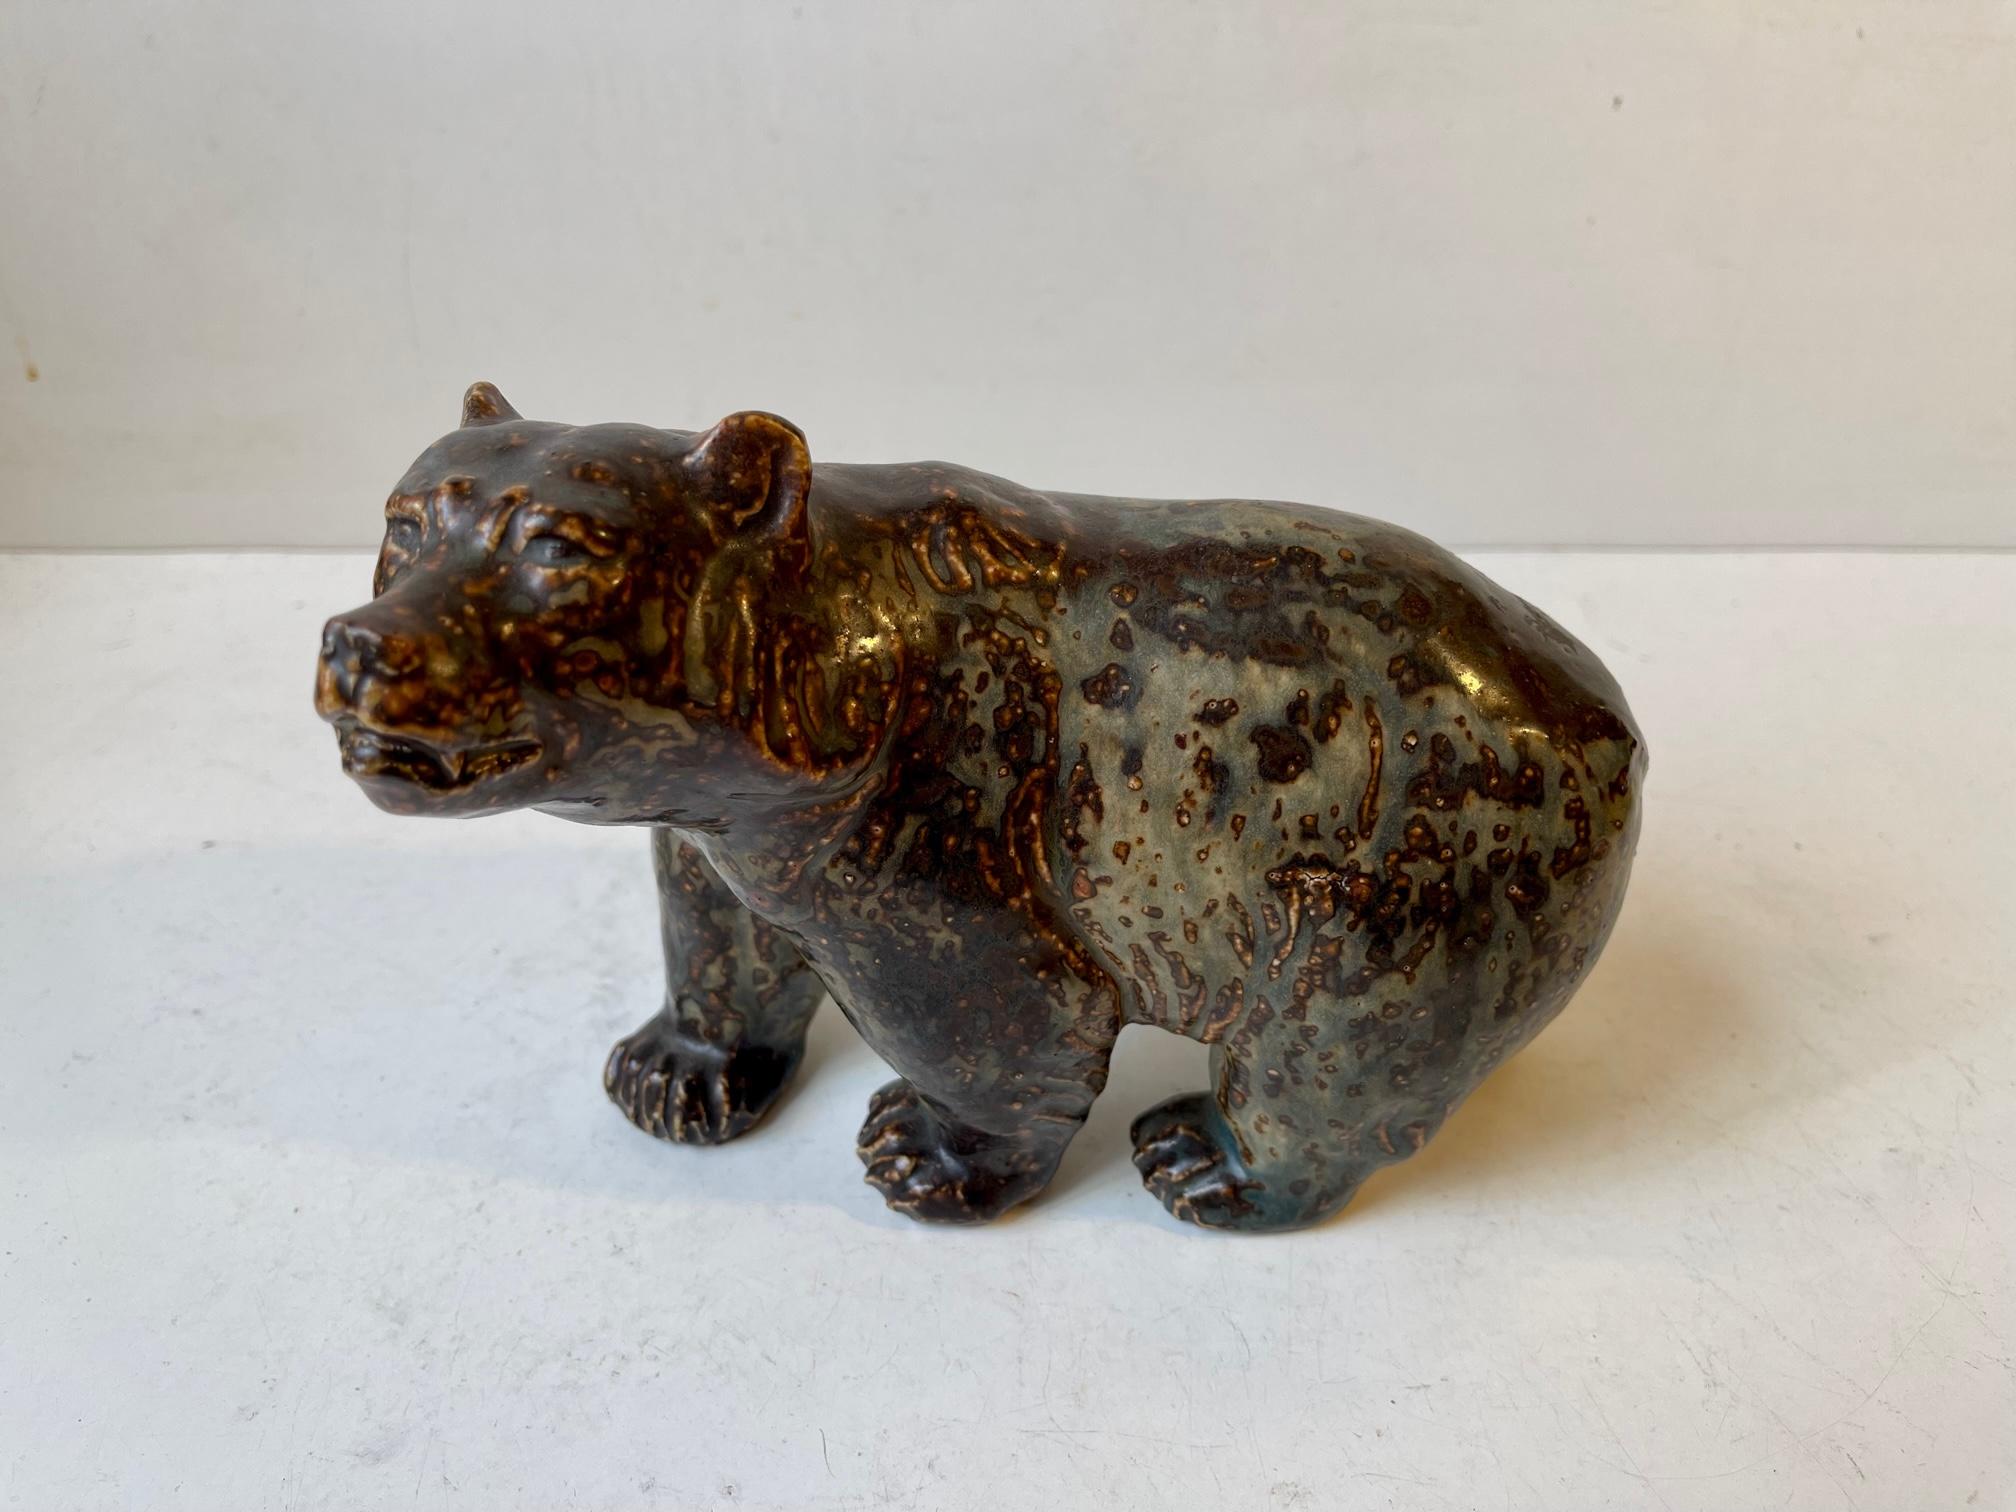 Rare hand-signed, numbered and marked bear sculpture. Designed by the Danish ceramist Knud Kyhn (KK) all the way back in 1929-36. Hugely inspired by the sung glazes applied in Axel Salto's and Bode Willumsen's this piece displays a great